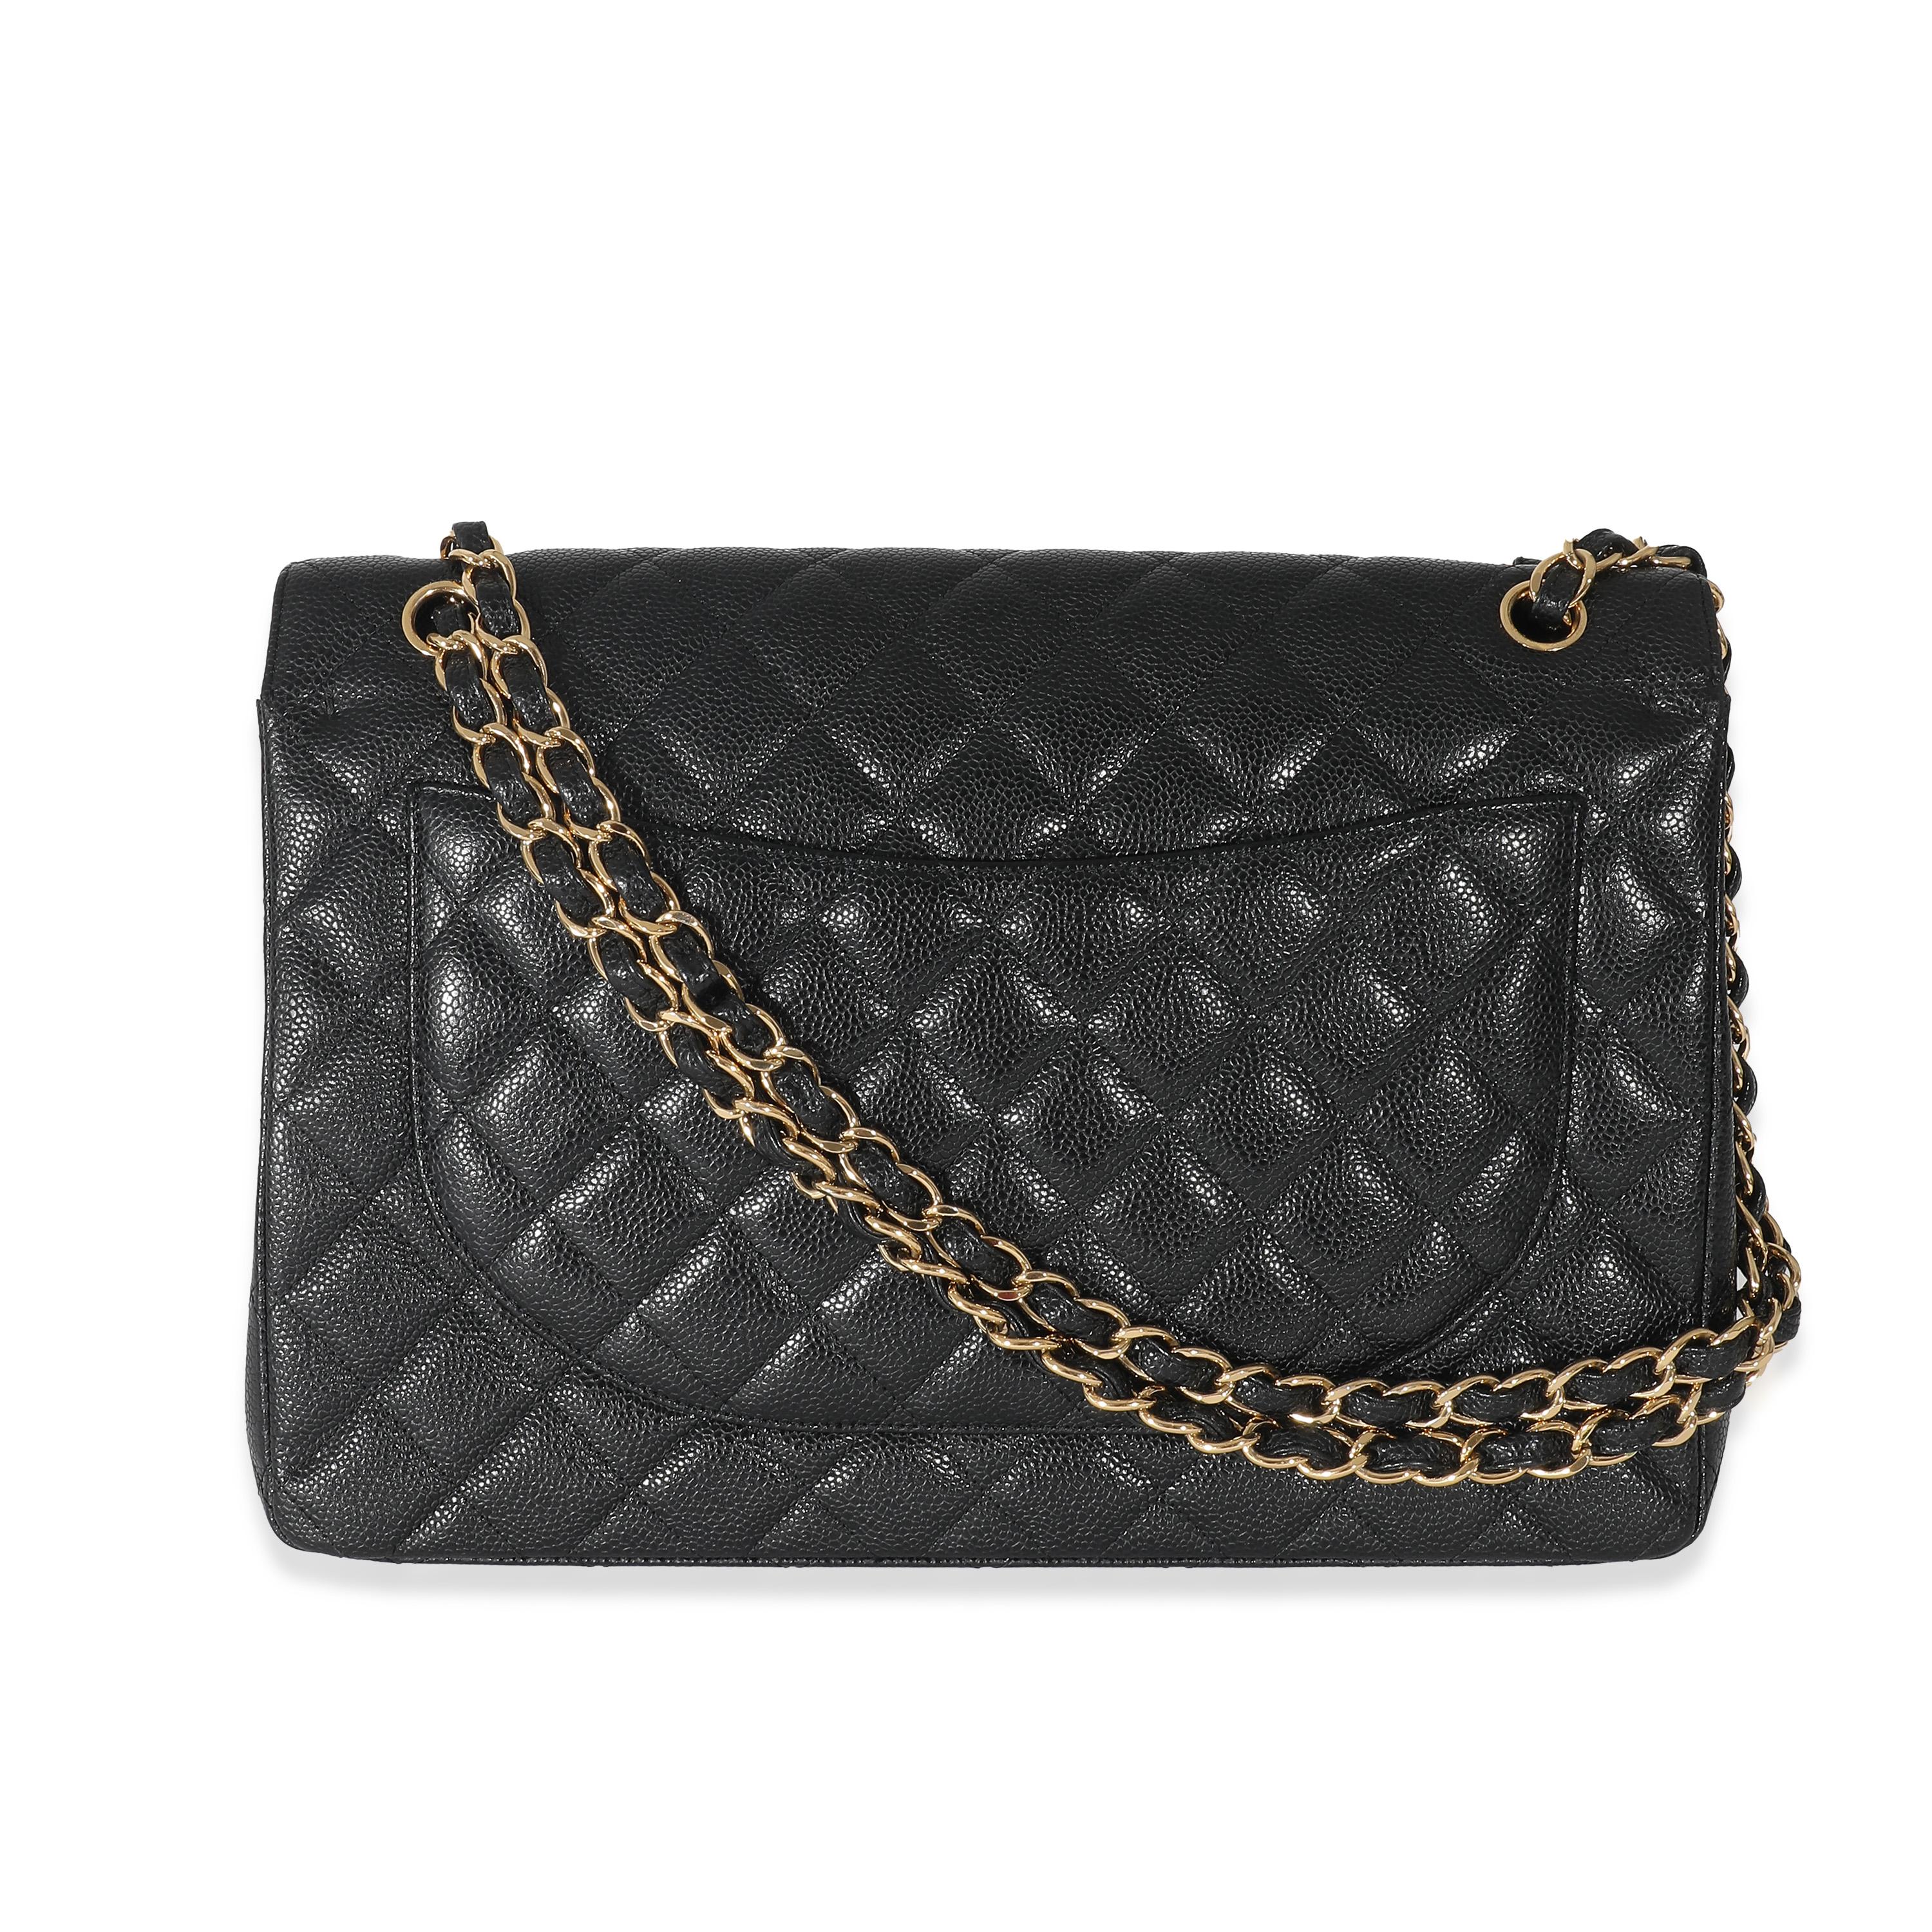 Chanel Black Caviar Maxi Double Flap Bag In Excellent Condition For Sale In New York, NY